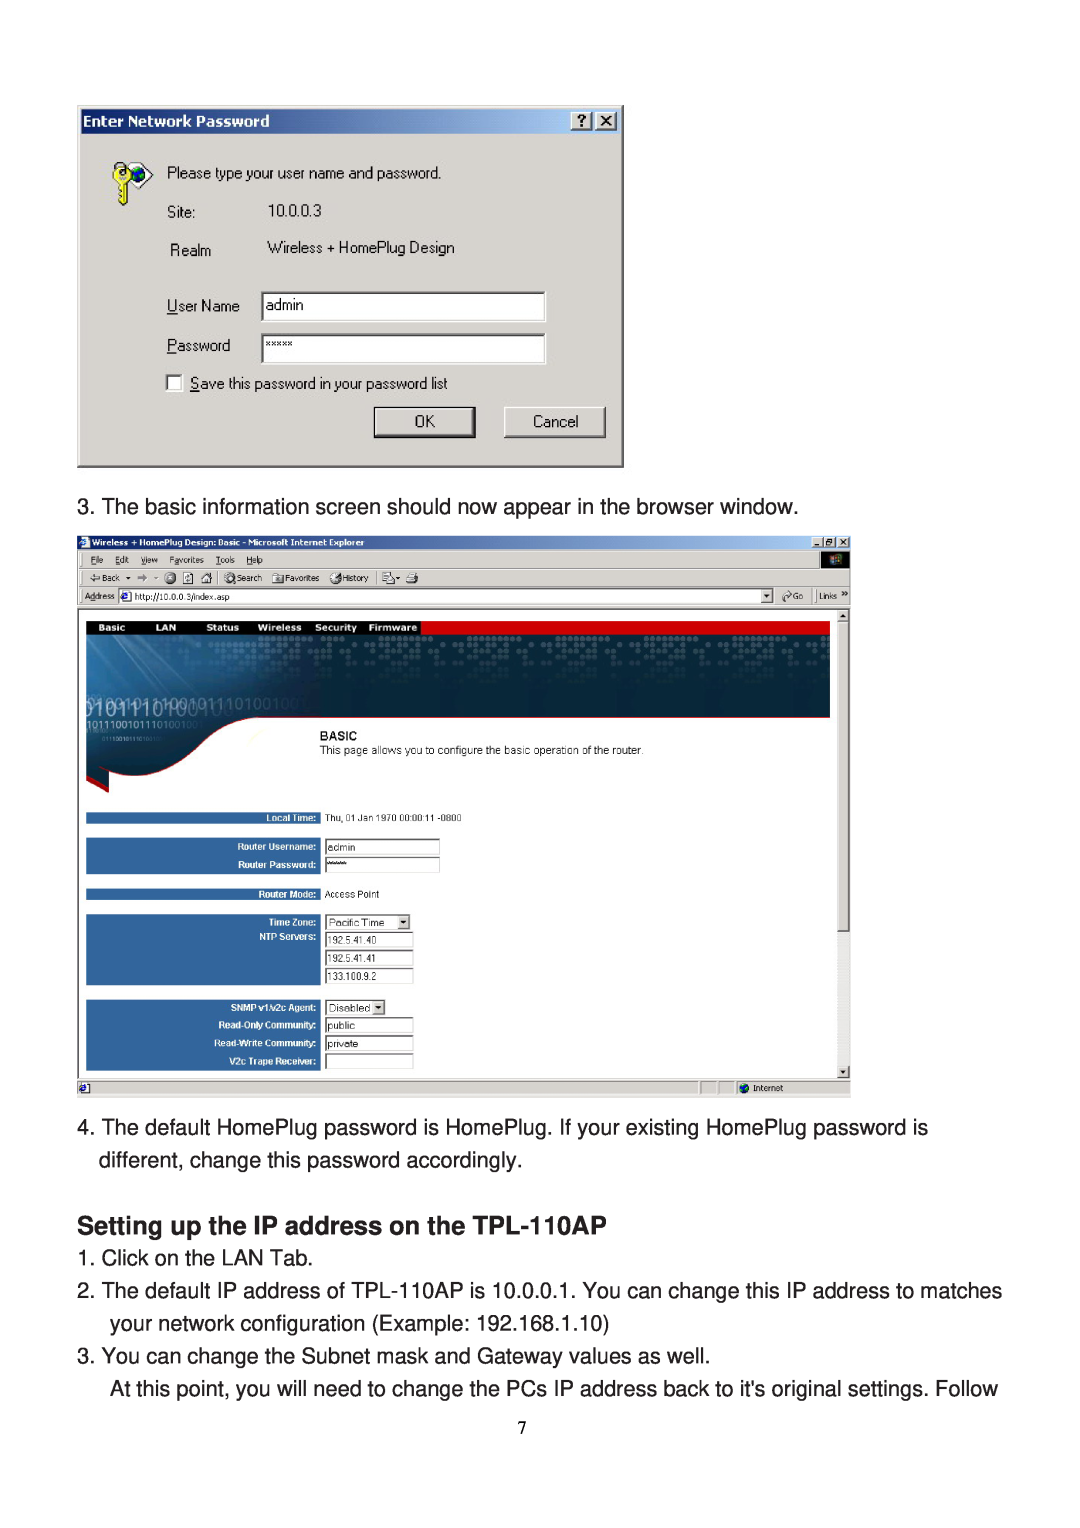 TRENDnet manual Setting up the IP address on the TPL-110AP 